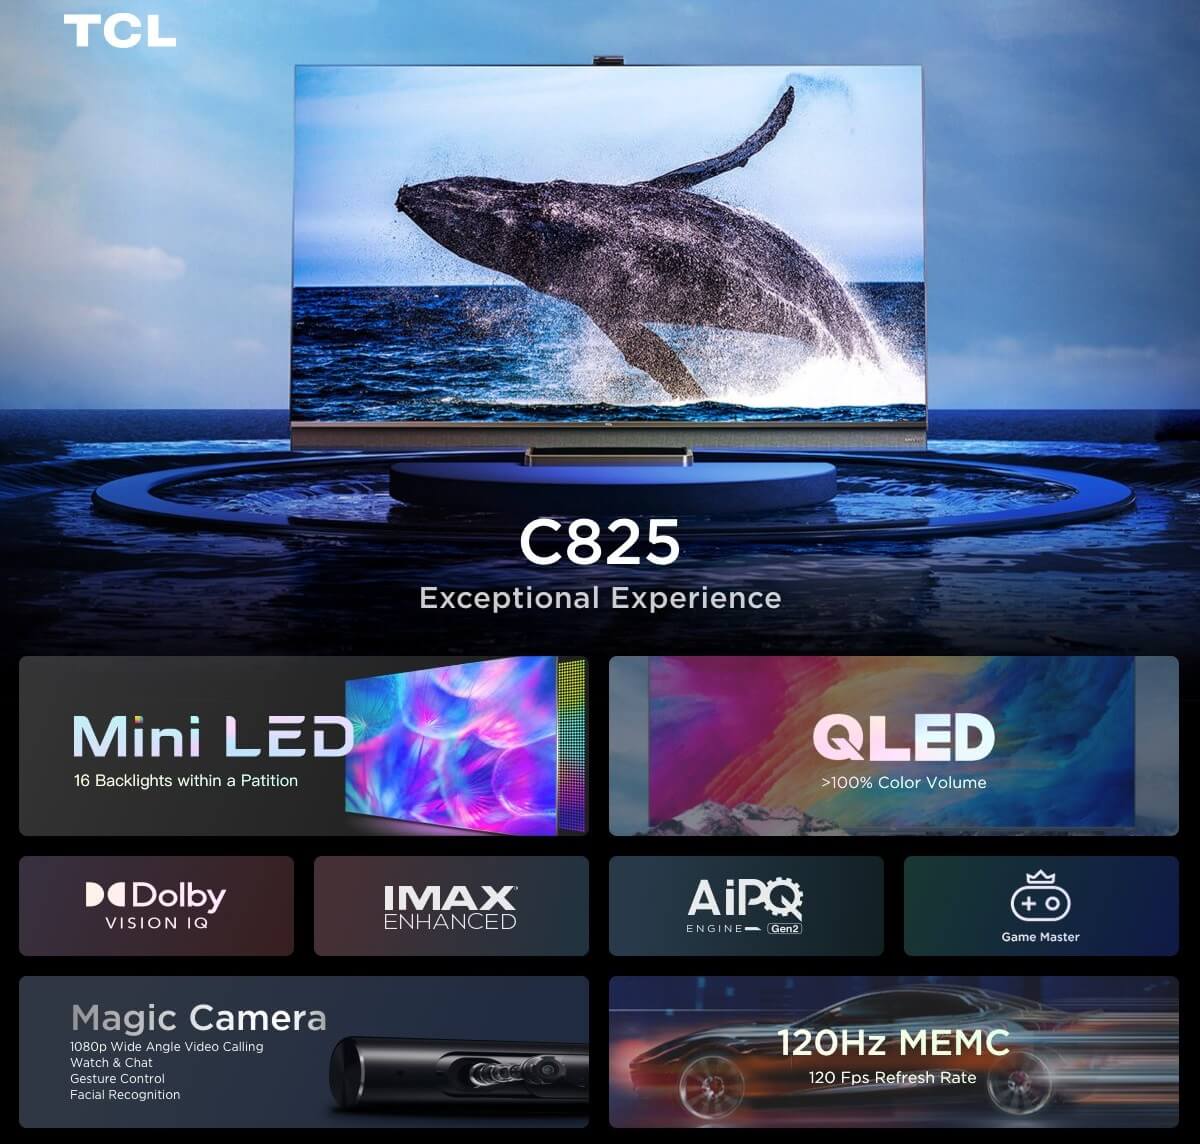 TCL C825 QLED TV features